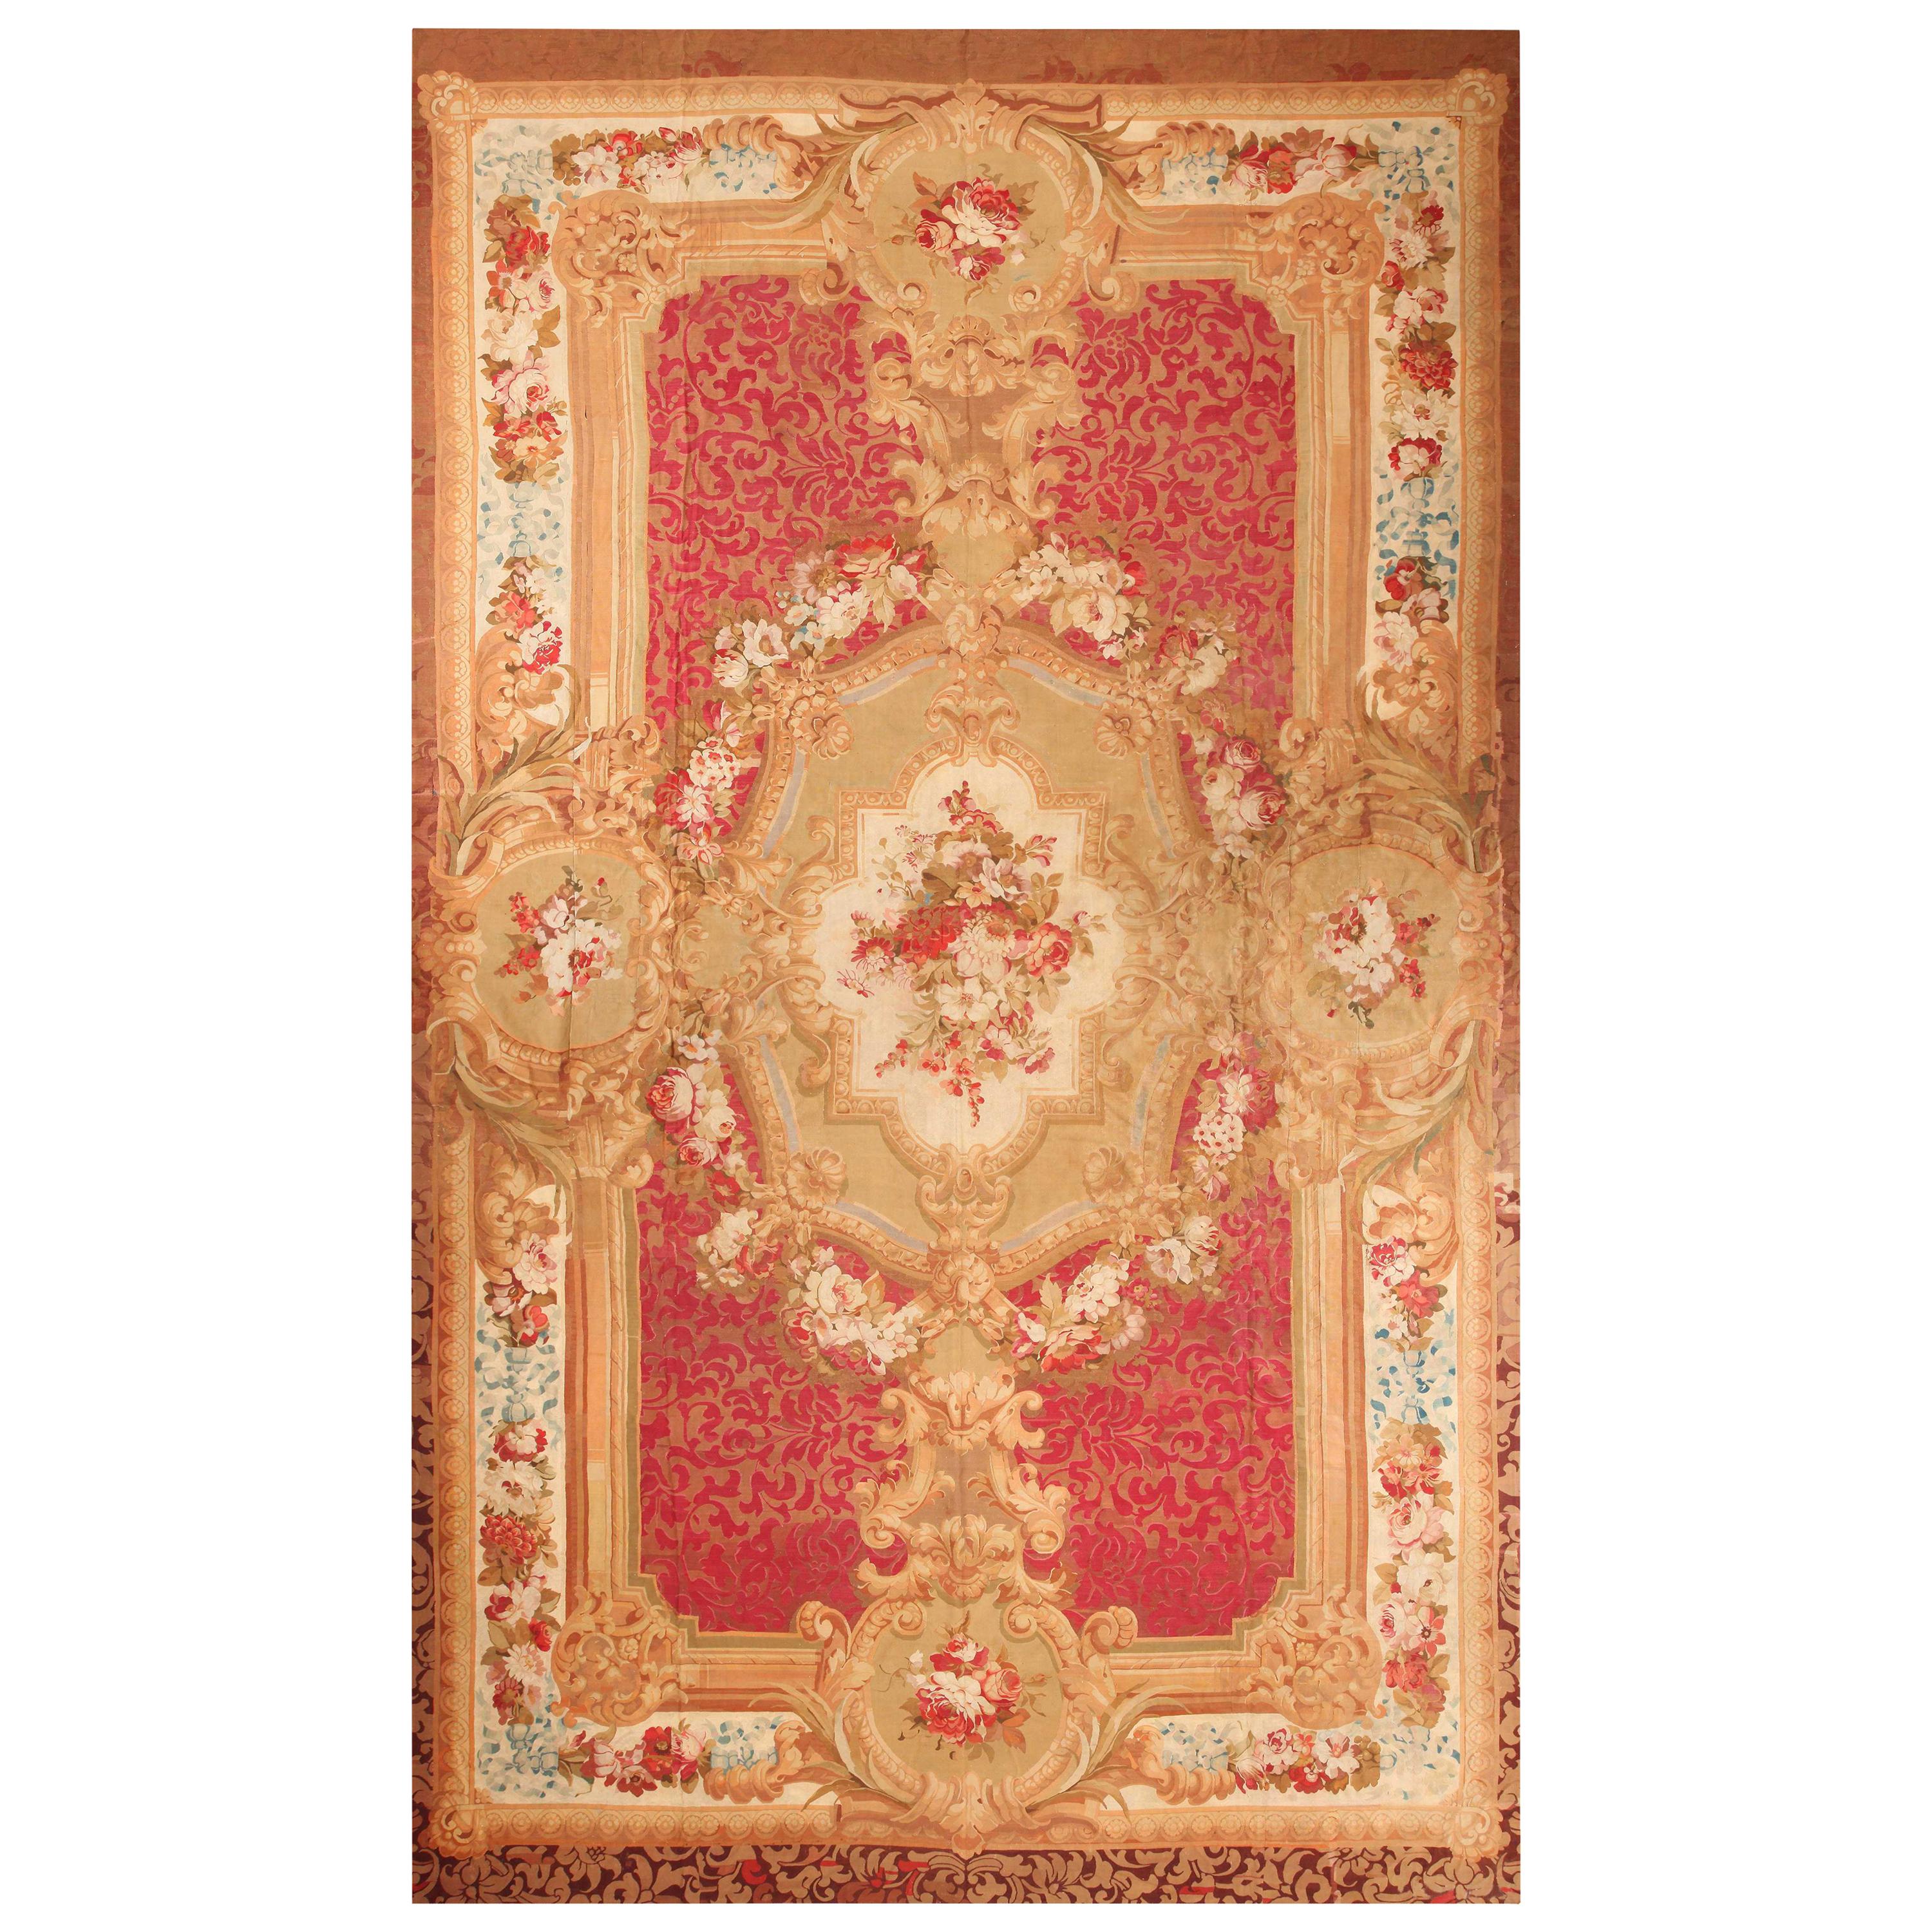 Nazmiyal Collection Antique French Aubusson Rug. Size: 16 ft x 26 ft 4 in